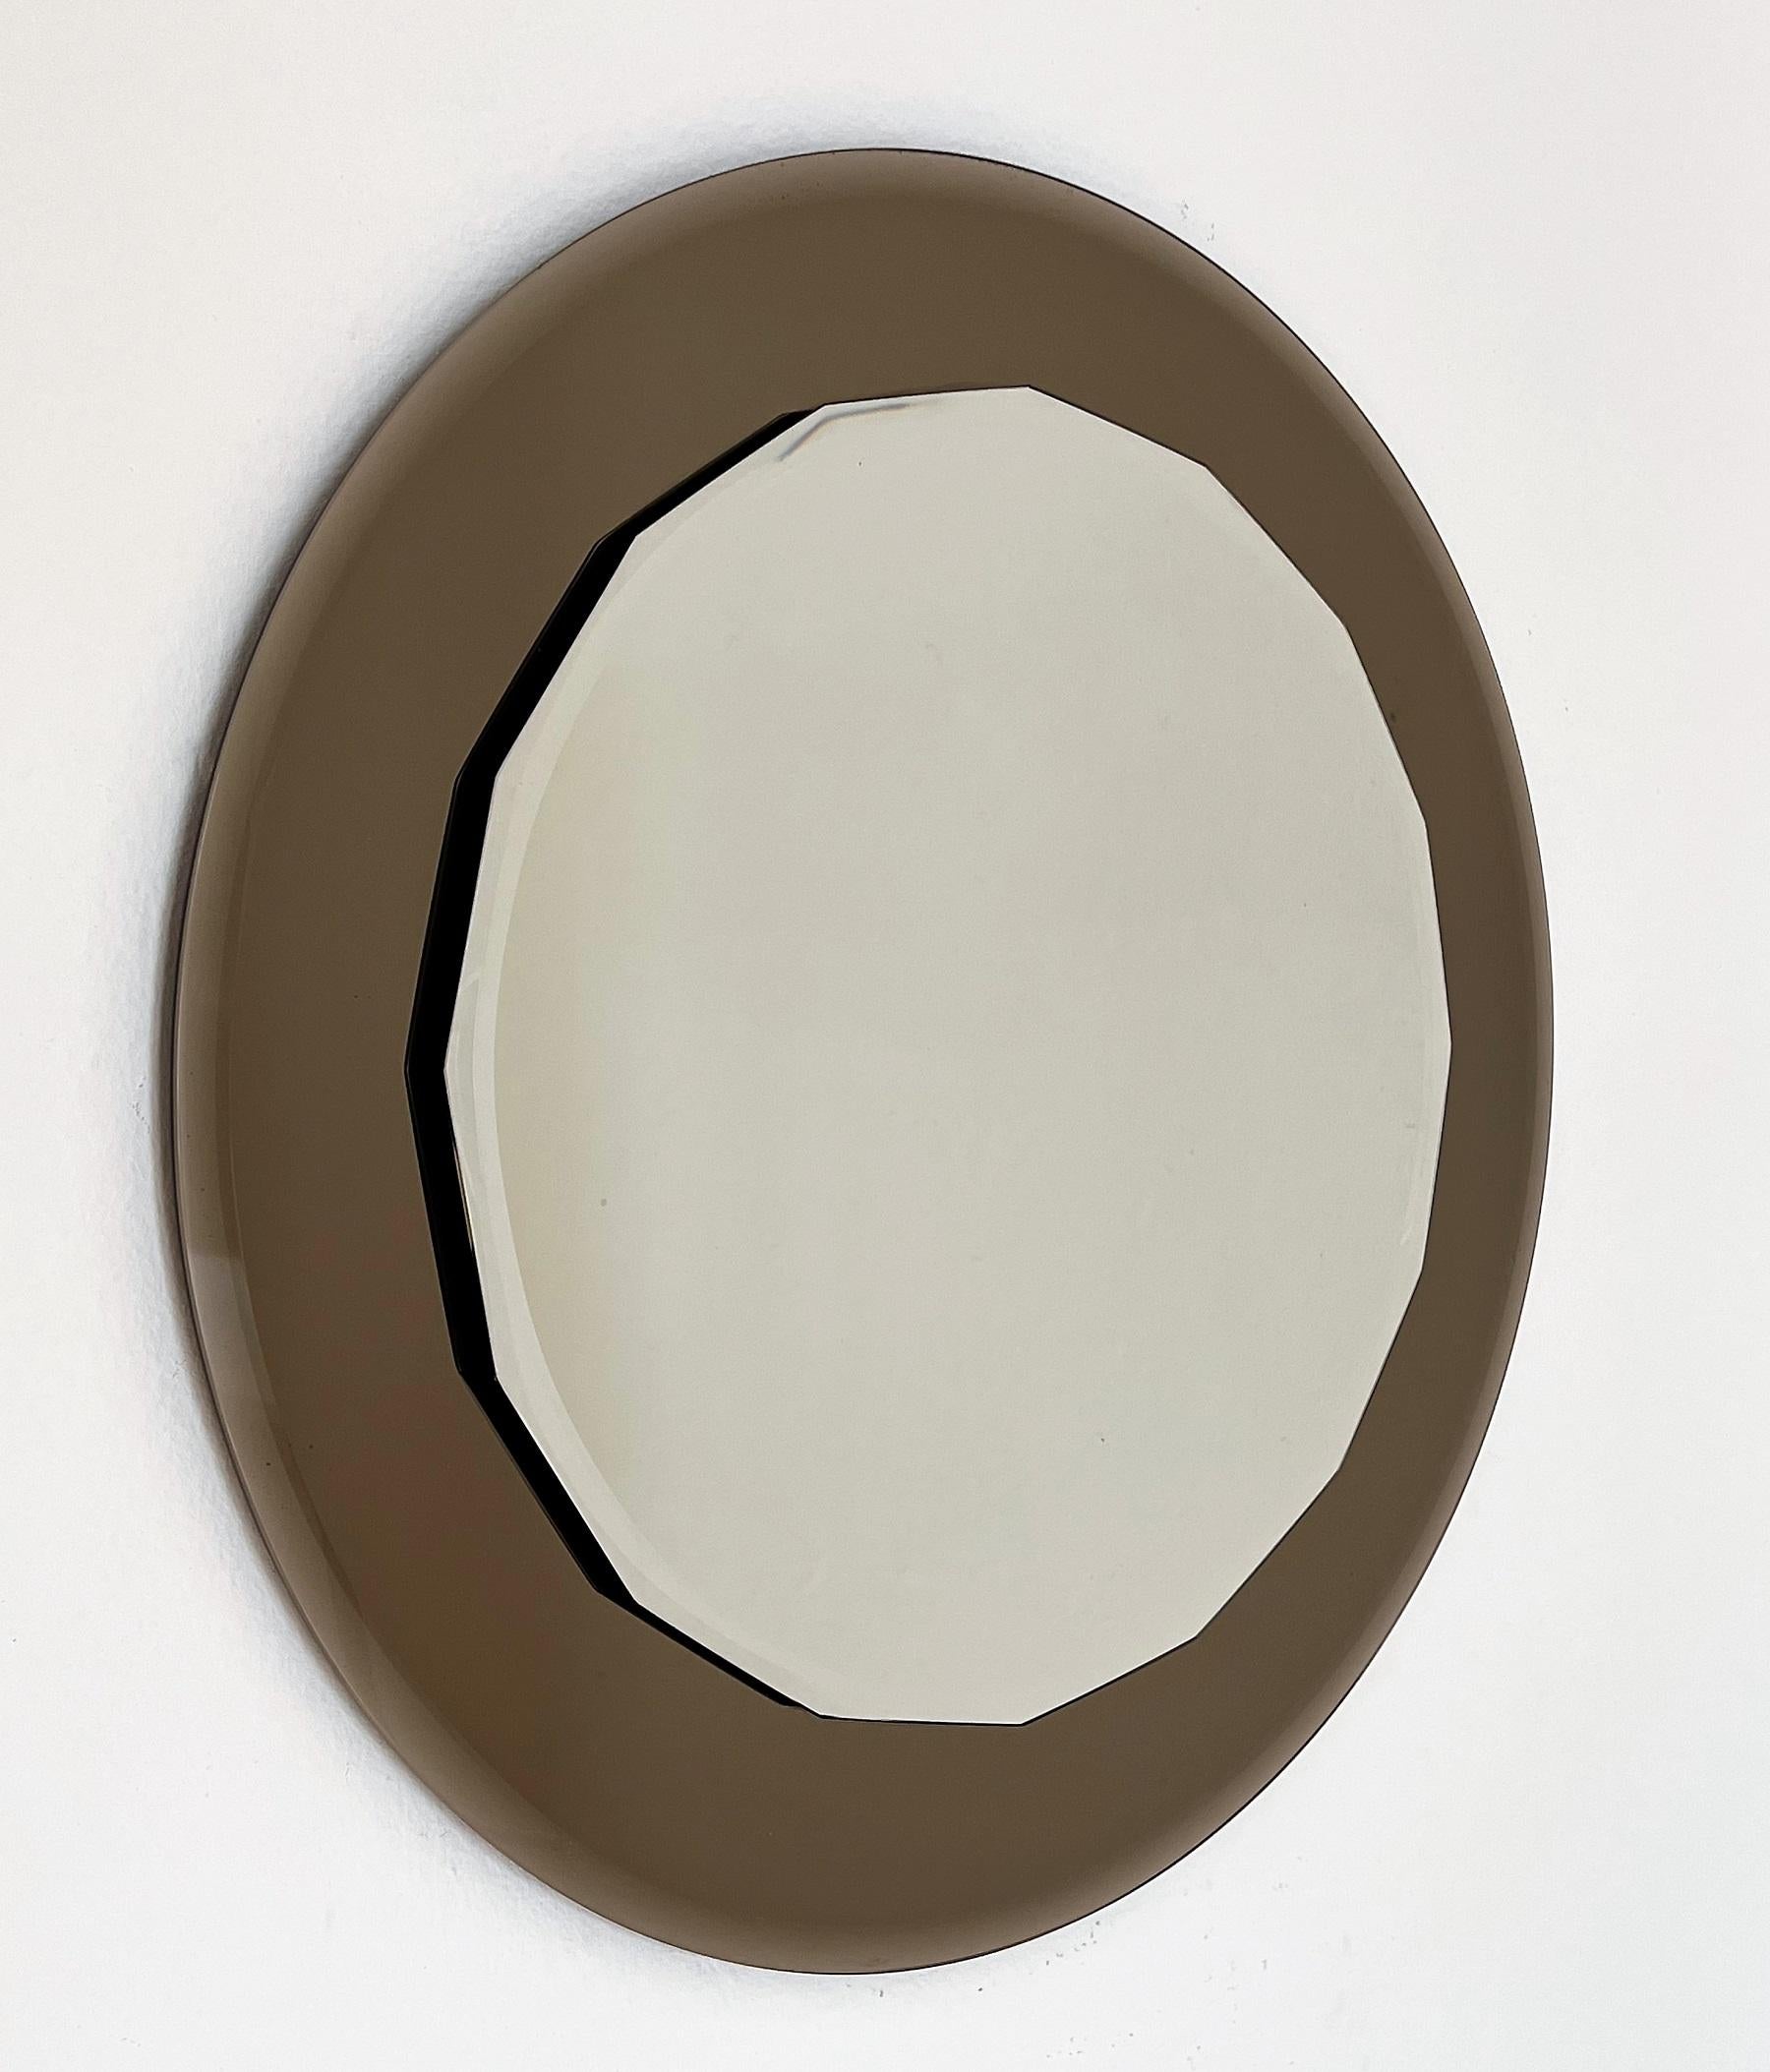 Round wall mirror made of heavy crystal mirrored glasses, Made in Italy by Cristal Arte during the 1970s.
The mirror is made of two mirror plates, the bigger round one behind is in light brown (smoke) color.
The smaller mirror on top has beautifully